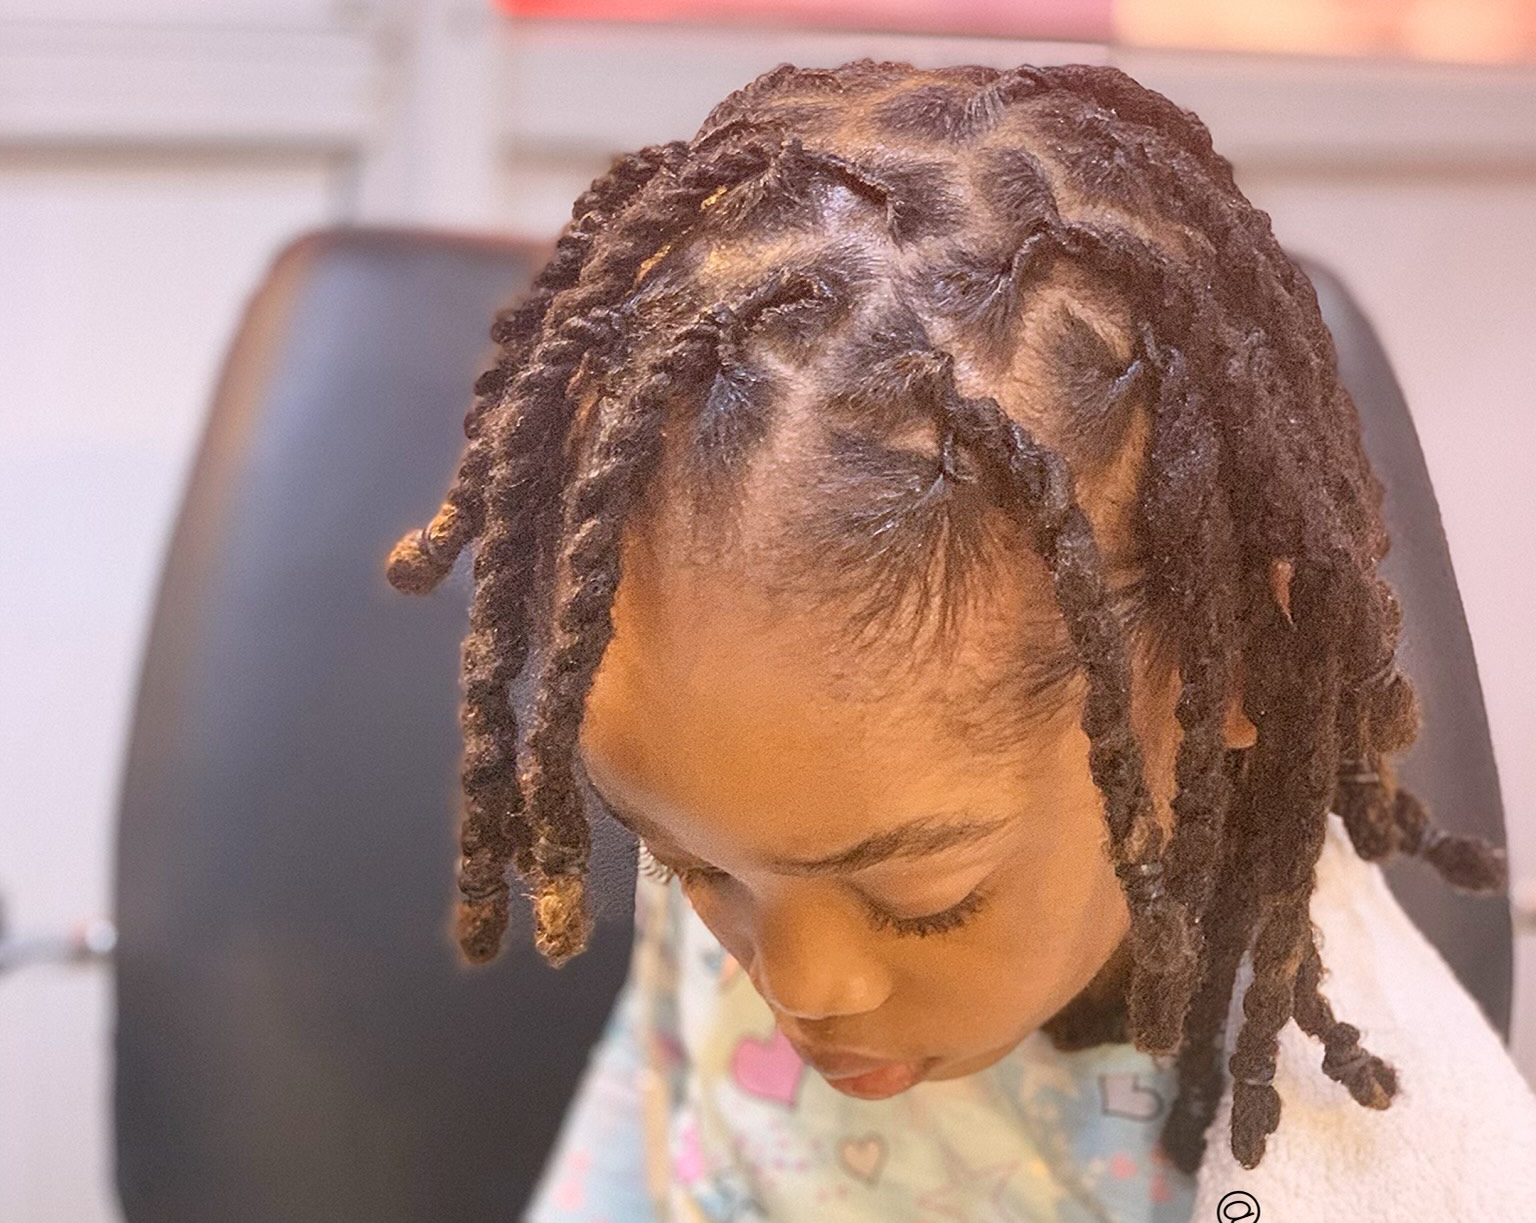 5 Basic Tips for Caring for Your Child’s Locs